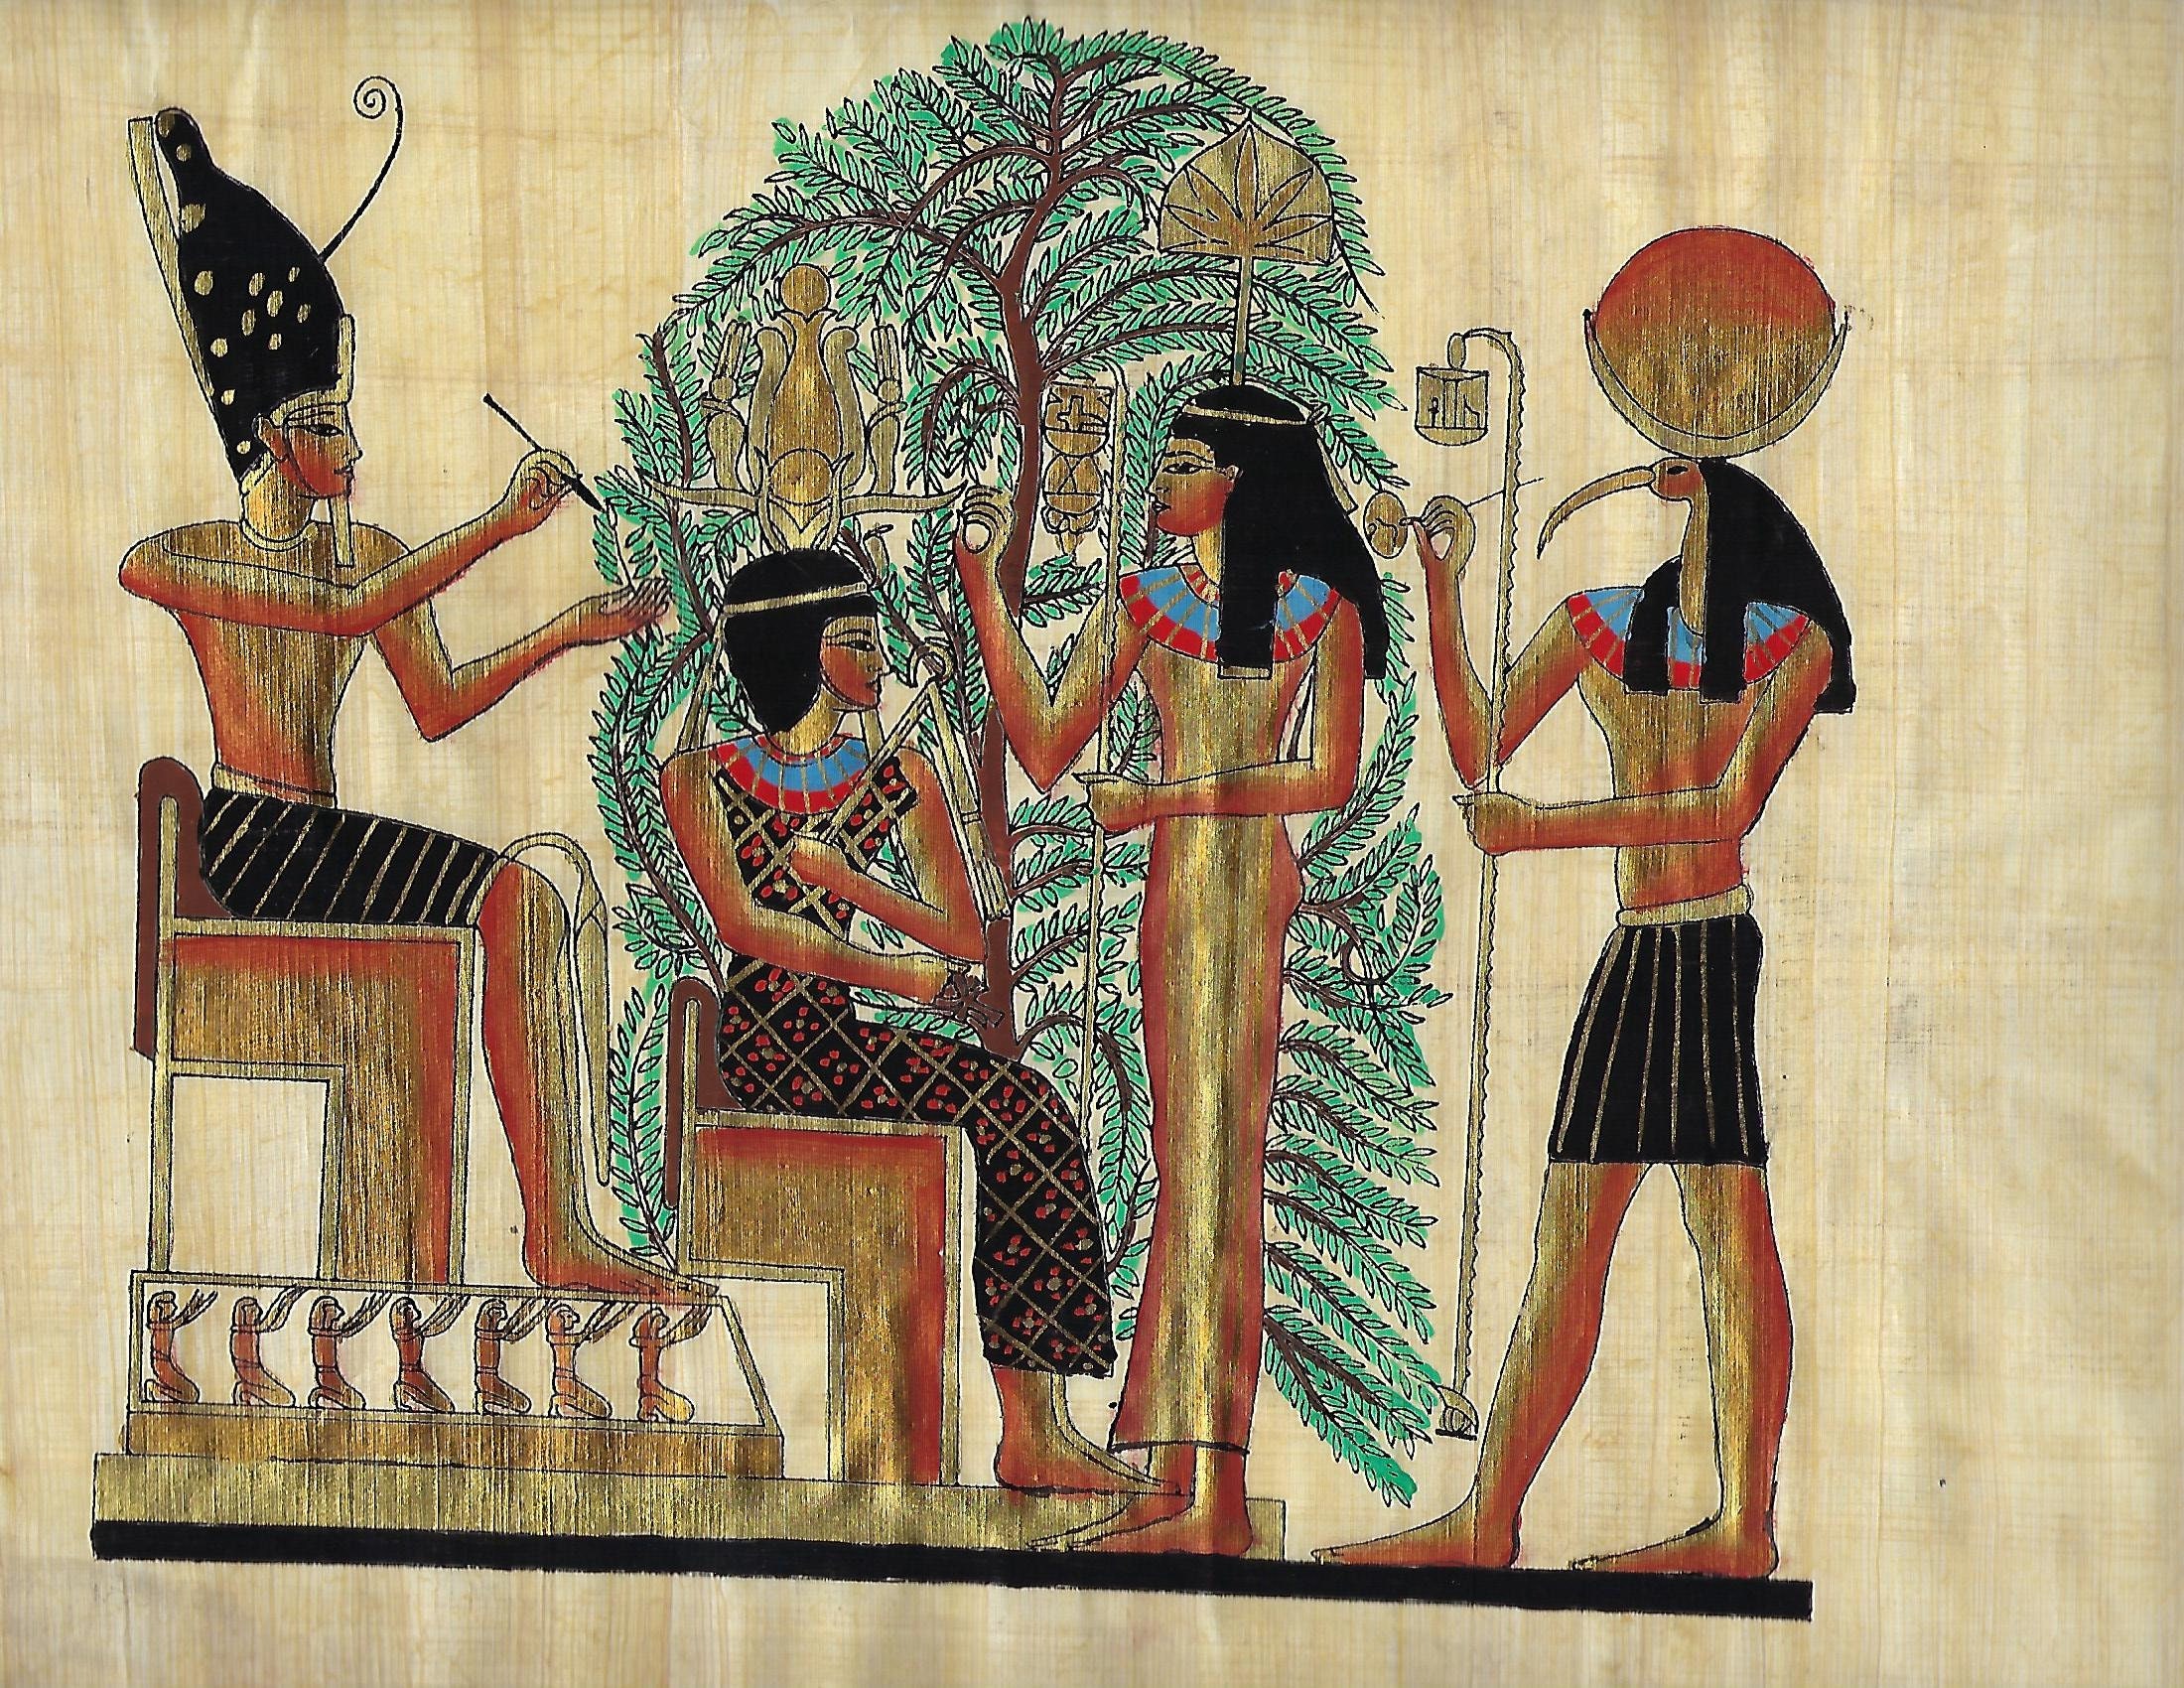 Tree of Life - Ancient Egyptian Papyrus Painting - Ancient Egypt